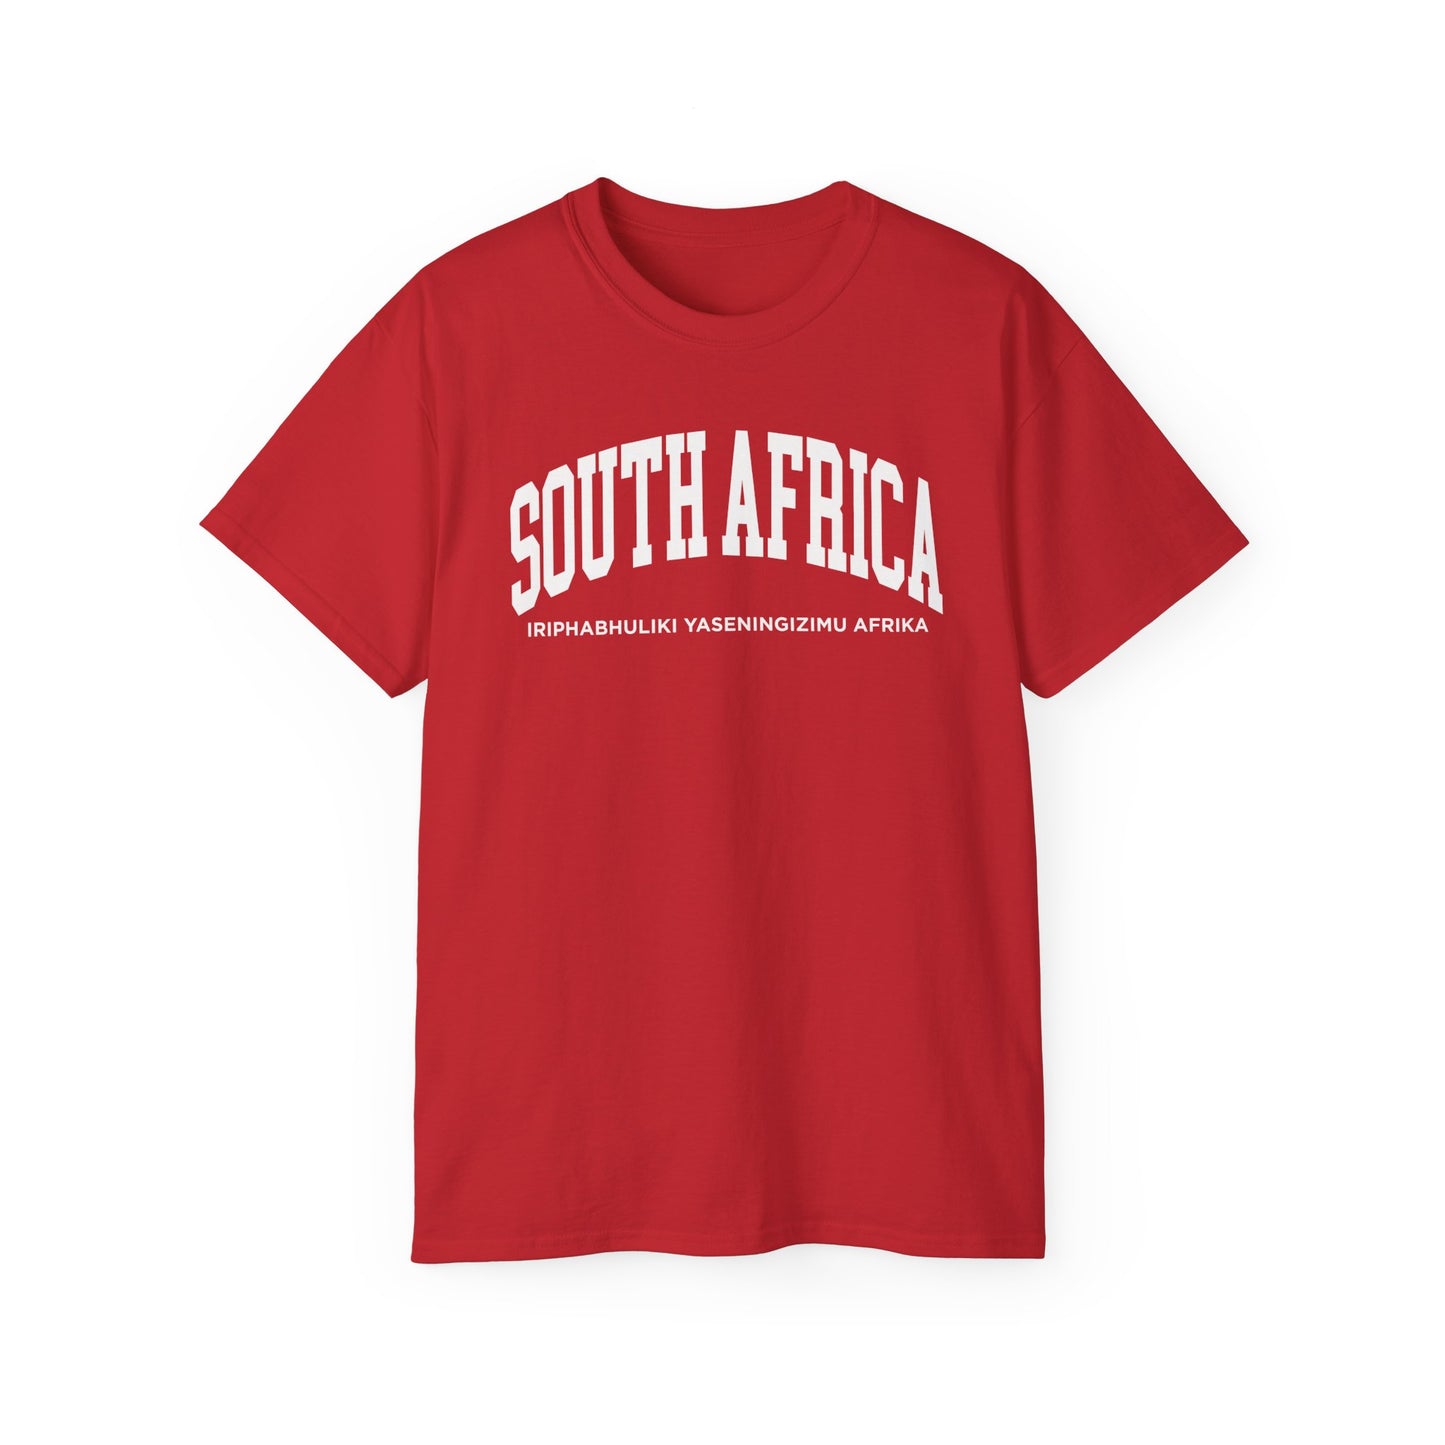 South Africa Tee